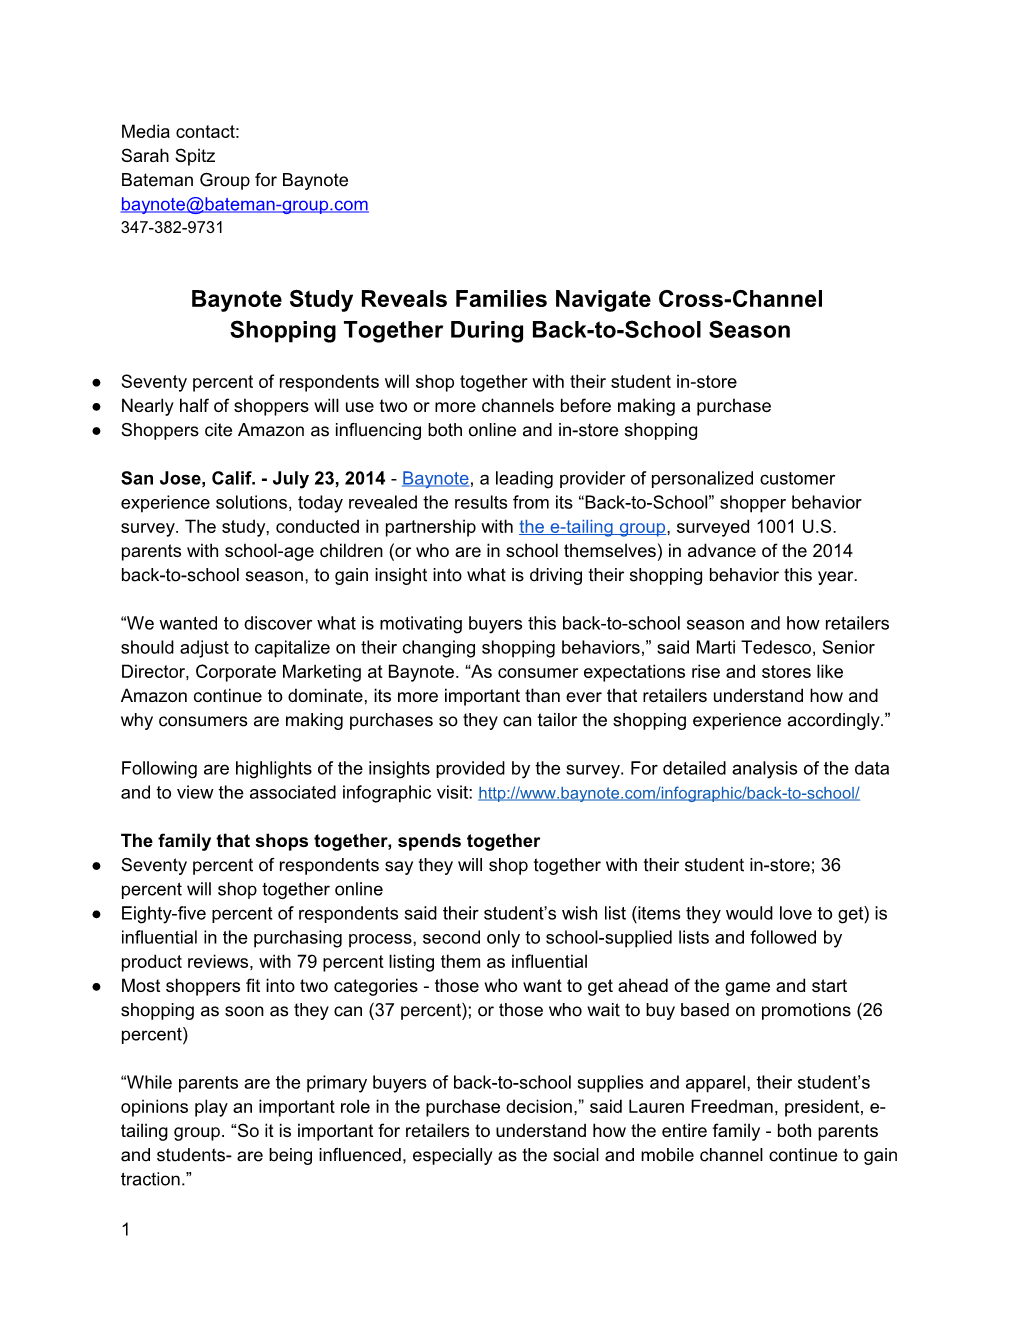 Baynote Back-To-School Press Release - Shared